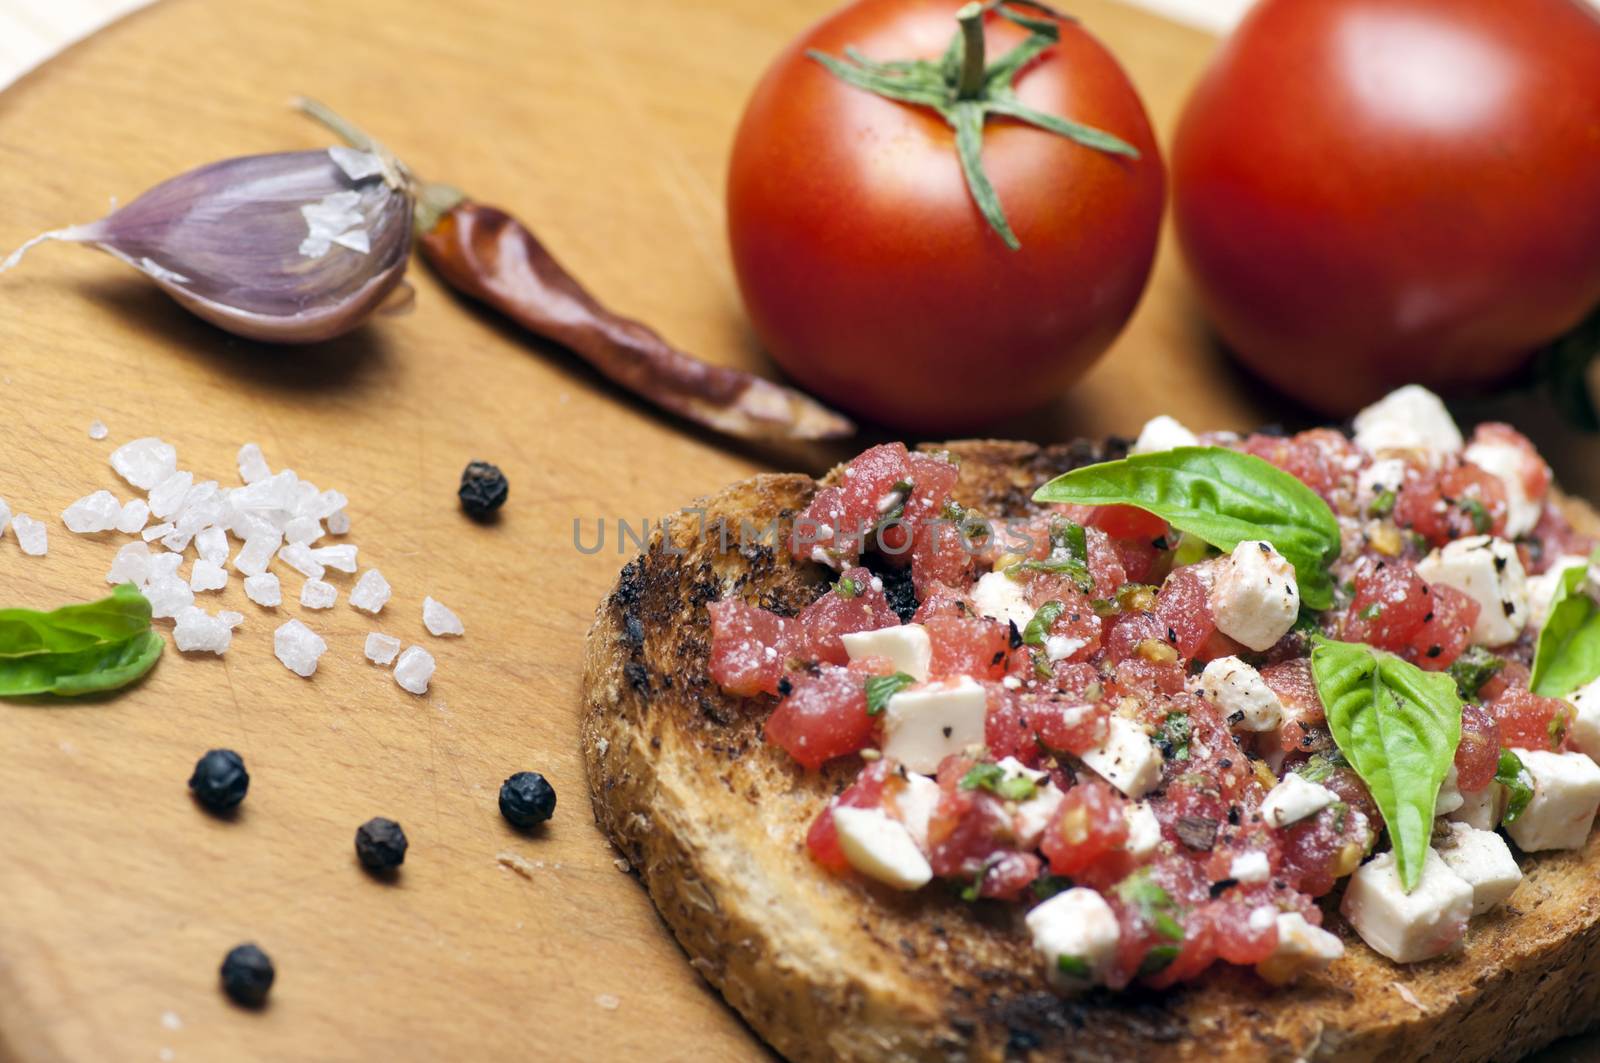 Italian bruschetta topped with tomatoes, basil and goat (feta) cheese